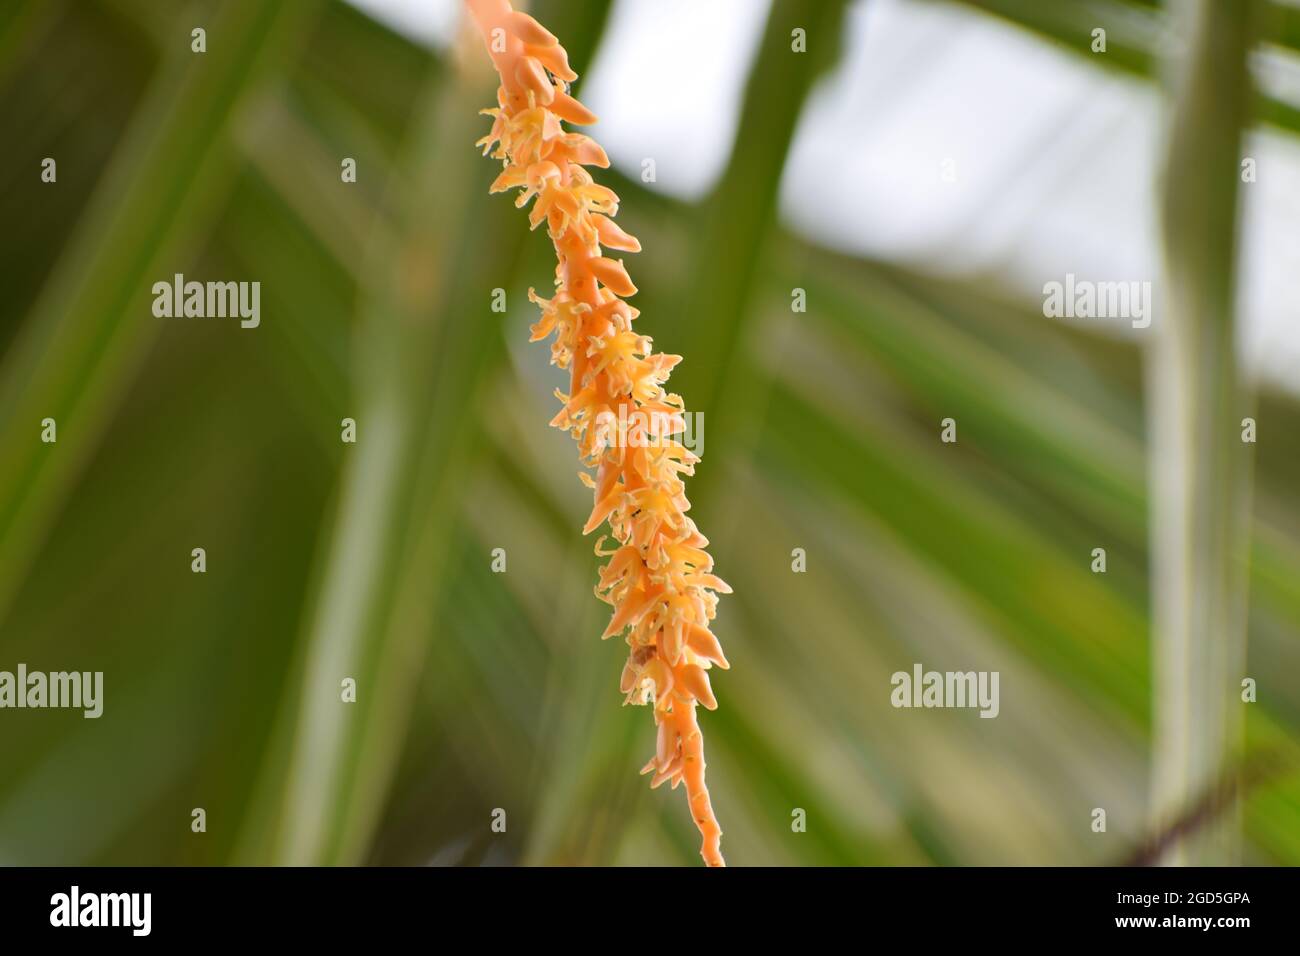 Isolated coconut flower, inflorescence flower, orange colour coconut flower clusters in nature Stock Photo